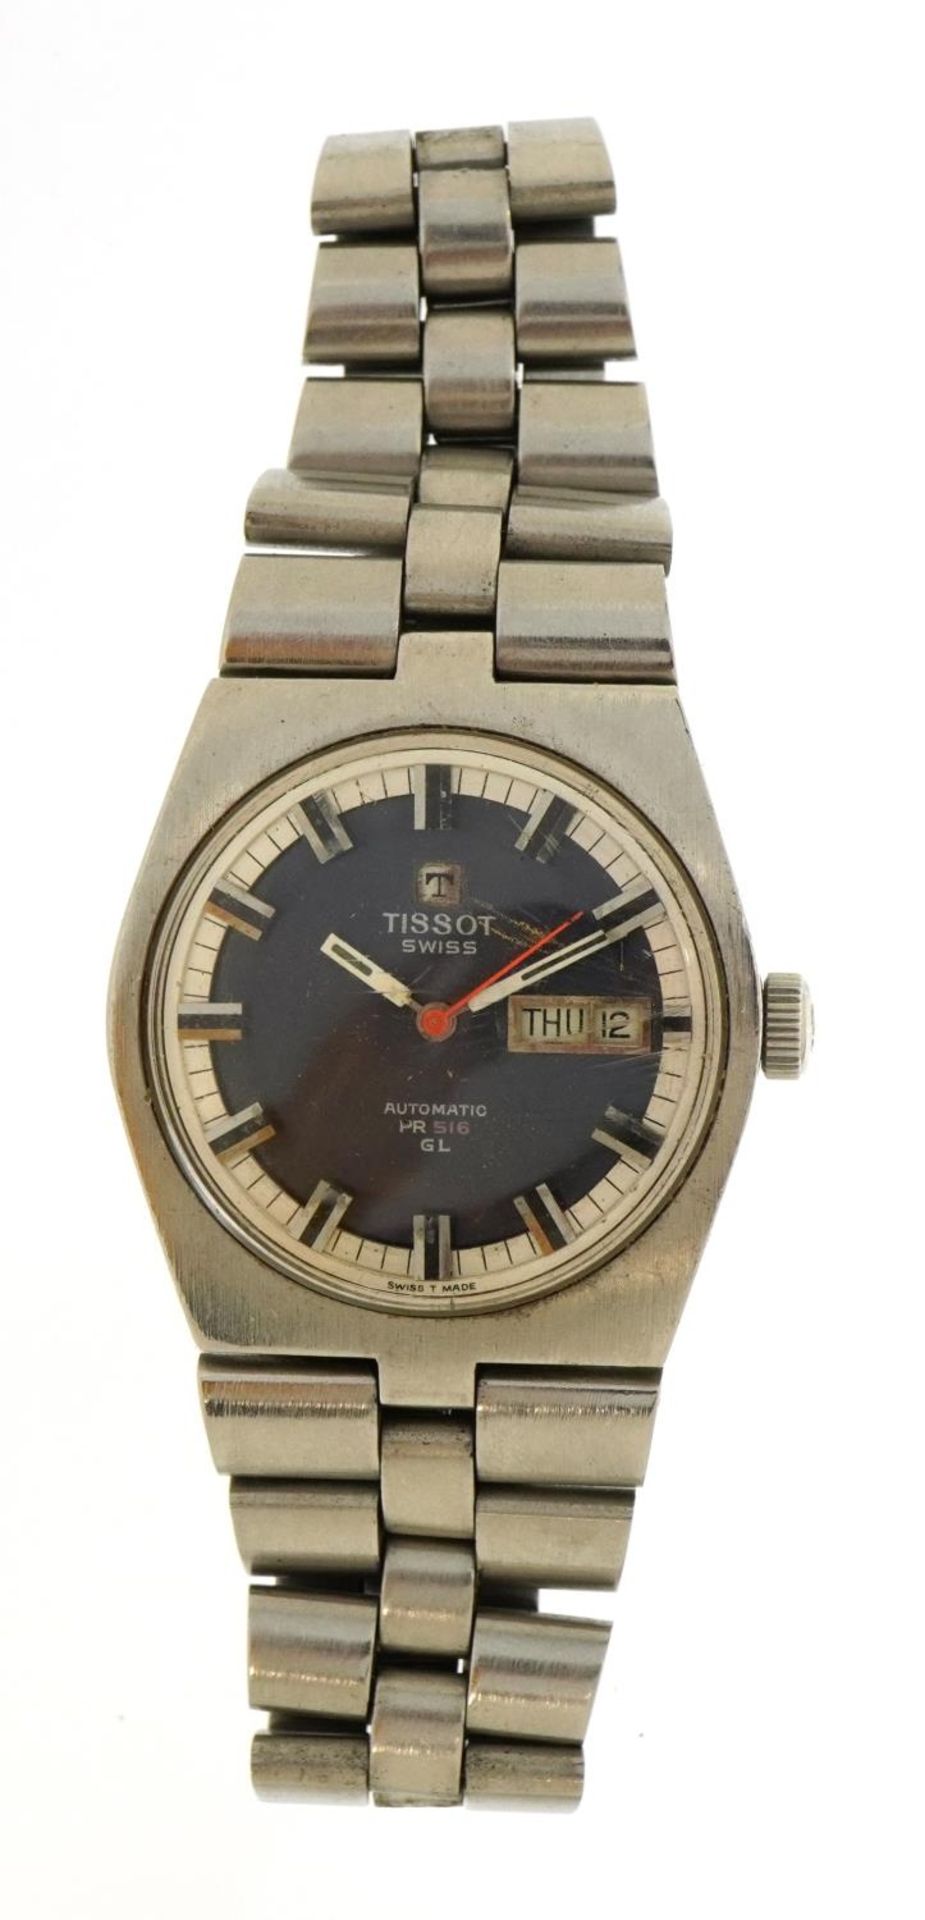 Tissot, gentlemen's Tissot PR516GL automatic wristwatch with date aperture, the case 36mm wide - Image 2 of 4